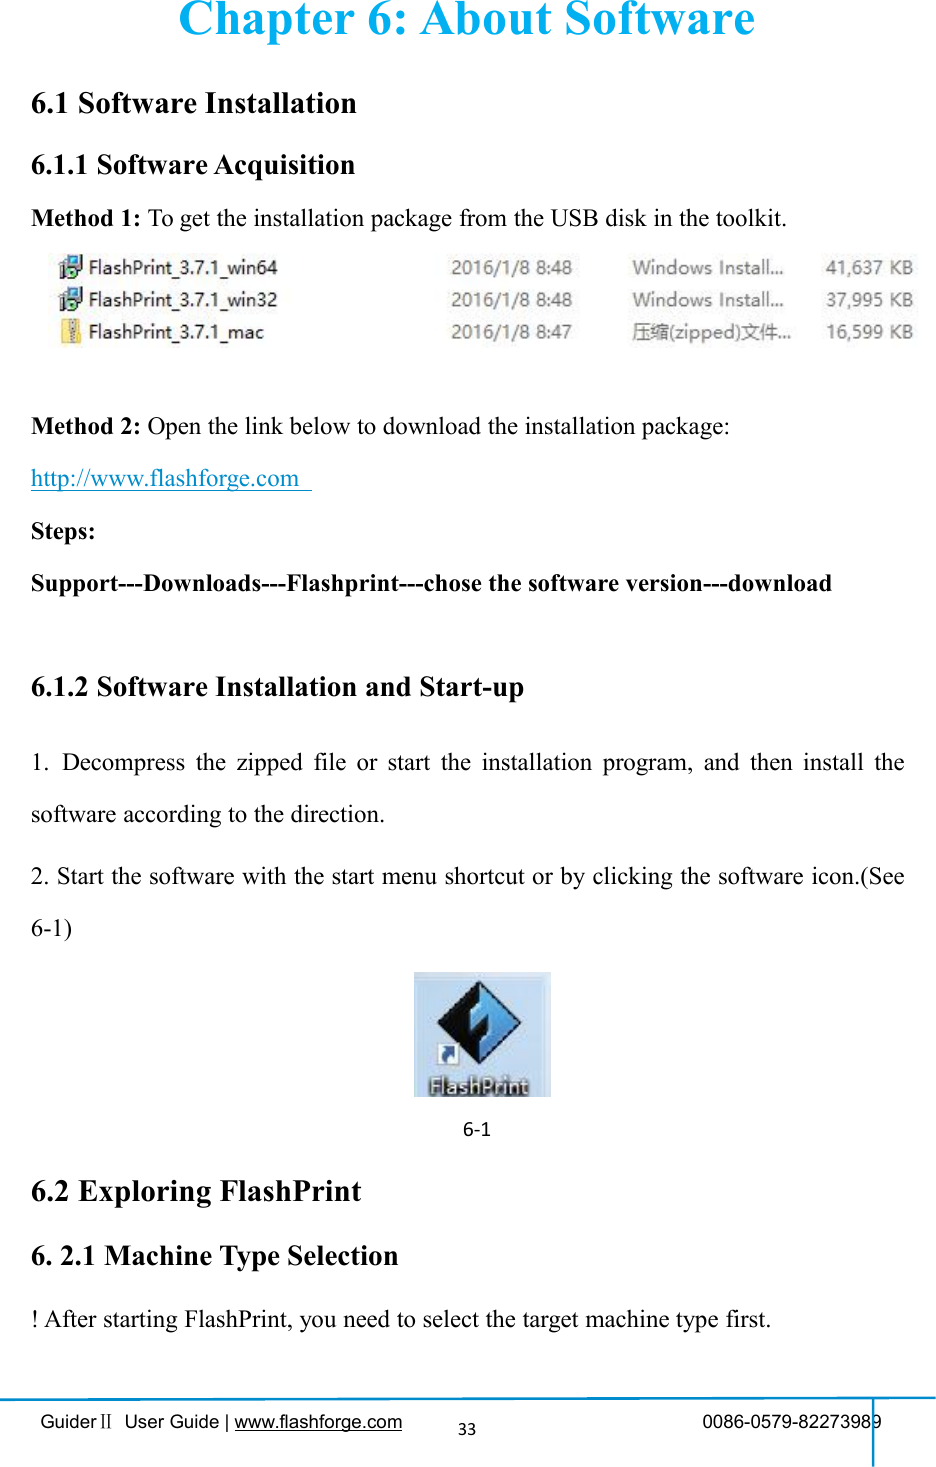 GuiderⅡUser Guide | www.flashforge.com 0086-0579-8227398933Chapter 6: About Software6.1 Software Installation6.1.1 Software AcquisitionMethod 1: To get the installation package from the USB disk in the toolkit.Method 2: Open the link below to download the installation package:http://www.flashforge.comSteps:Support---Downloads---Flashprint---chose the software version---download6.1.2 Software Installation and Start-up1. Decompress the zipped file or start the installation program, and then install thesoftware according to the direction.2. Start the software with the start menu shortcut or by clicking the software icon.(See6-1)6-16.2 Exploring FlashPrint6. 2.1 Machine Type Selection! After starting FlashPrint, you need to select the target machine type first.